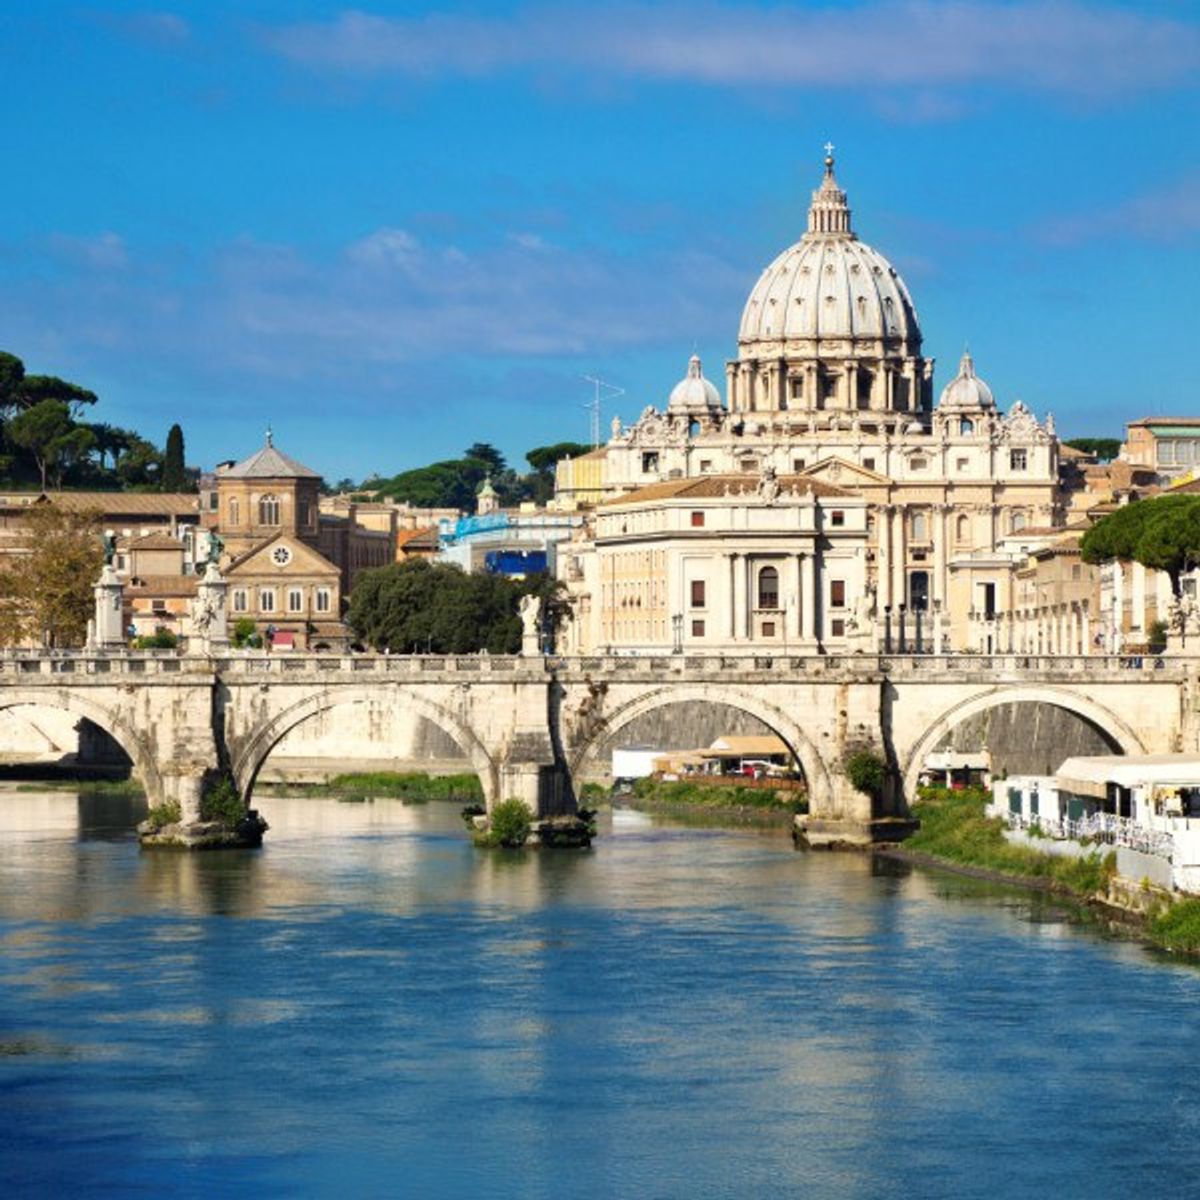 7 Signs You Studied Abroad In Rome